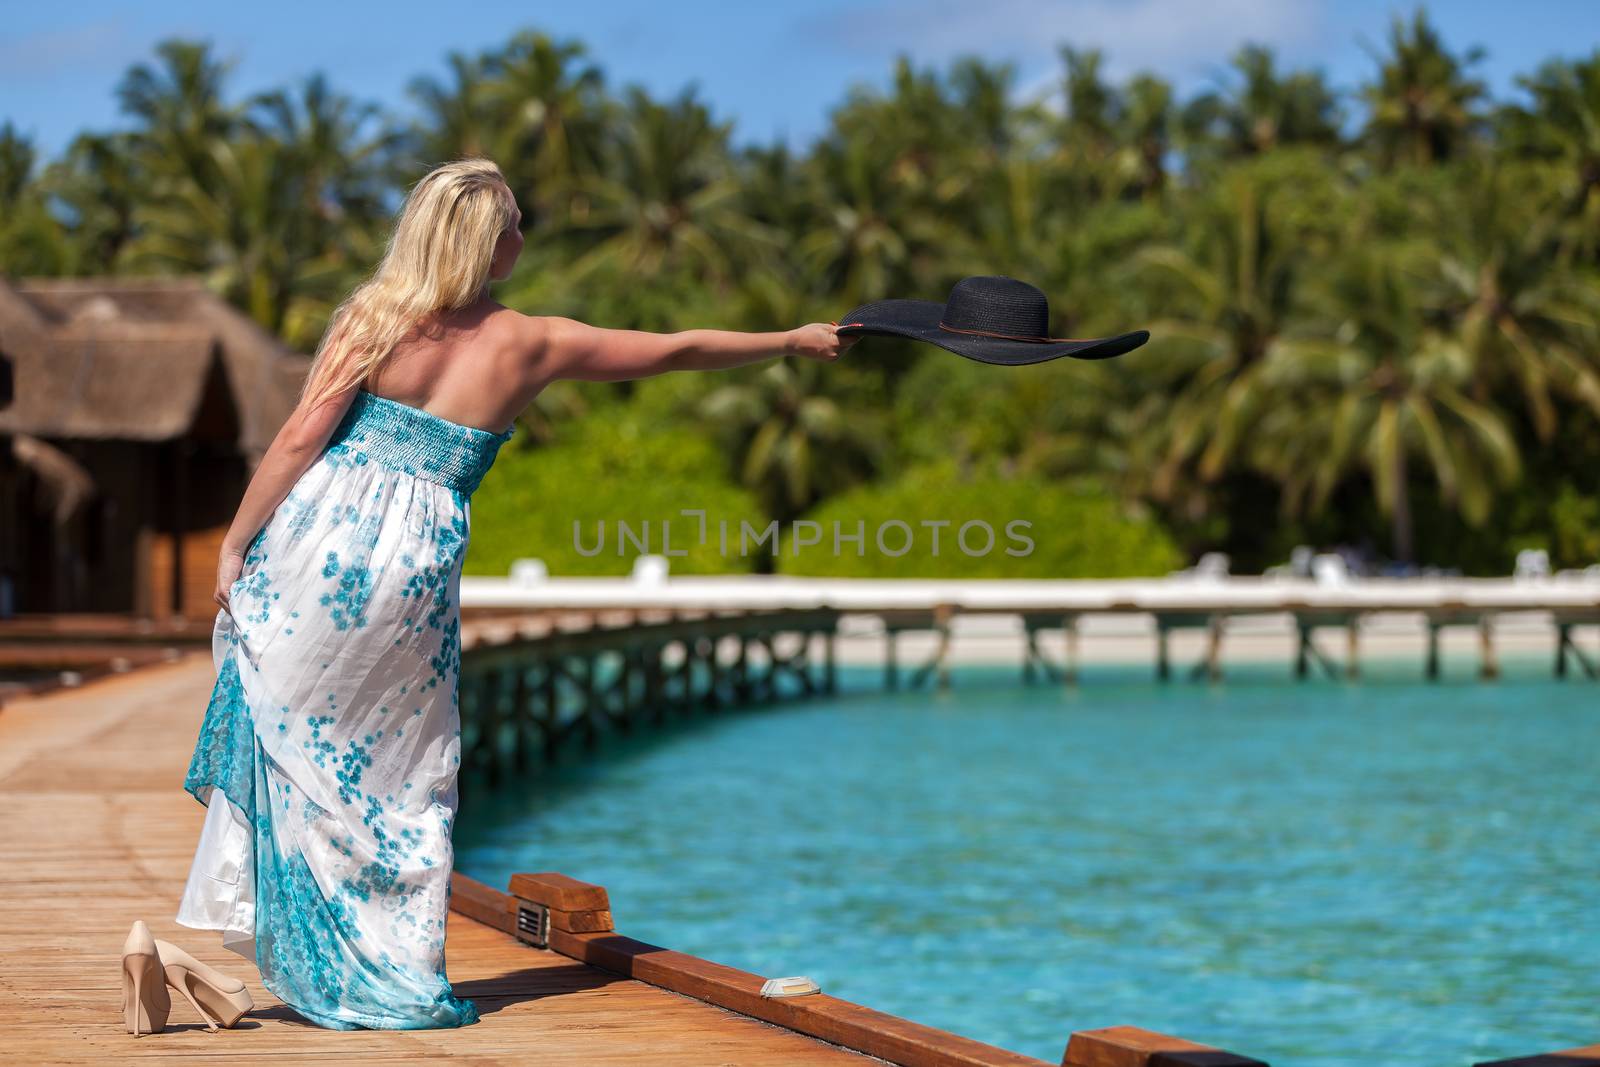 Maldives, Woman throwing her hat into the water by 25ehaag6